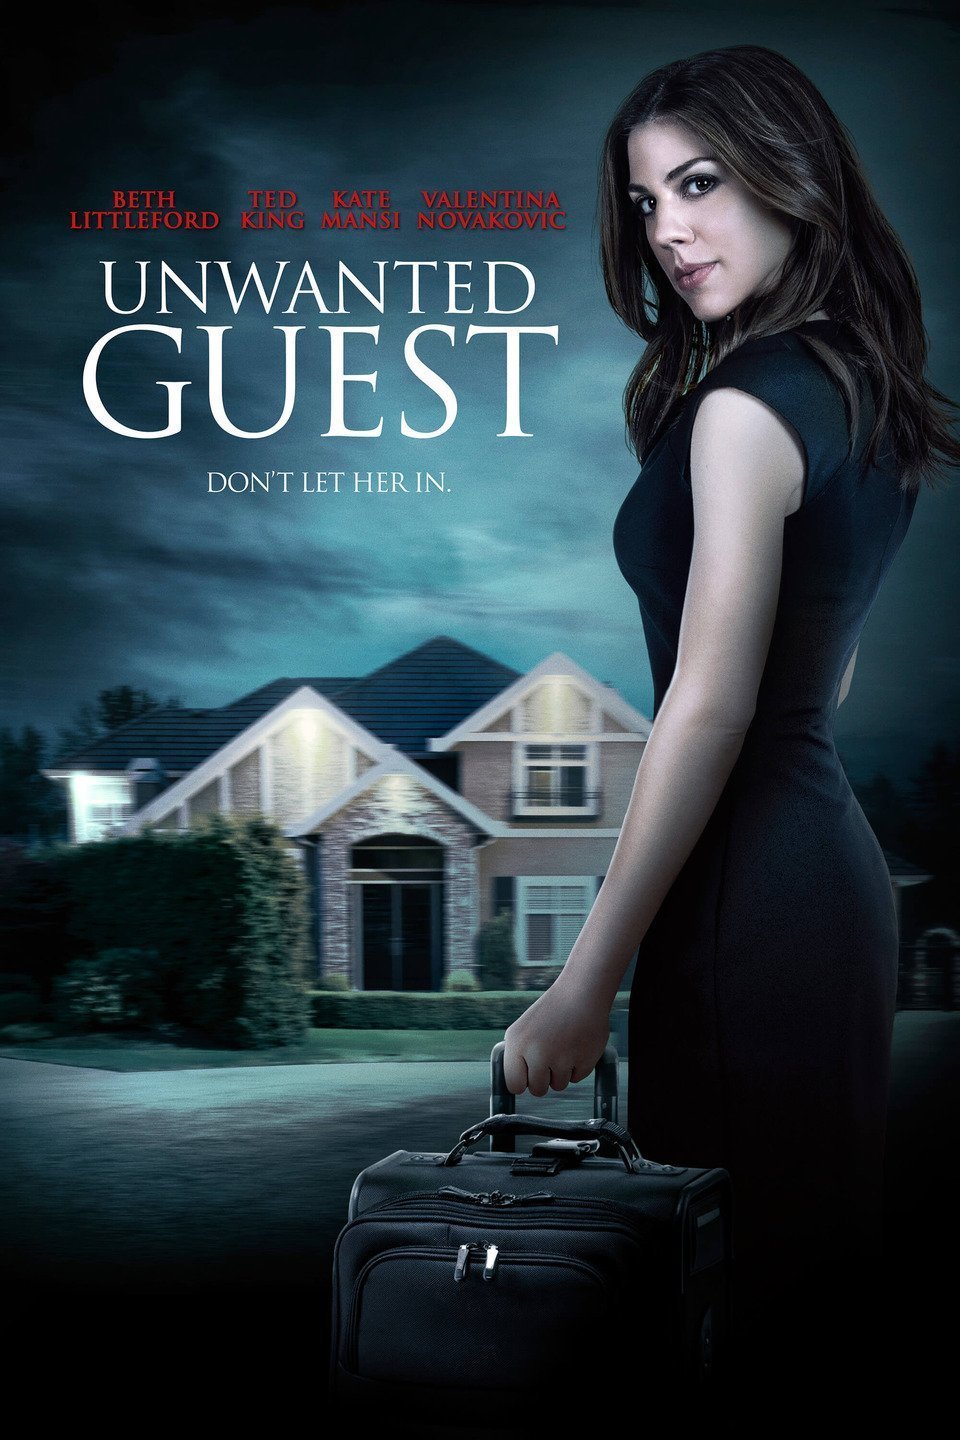 Poster of the movie Unwanted Guest